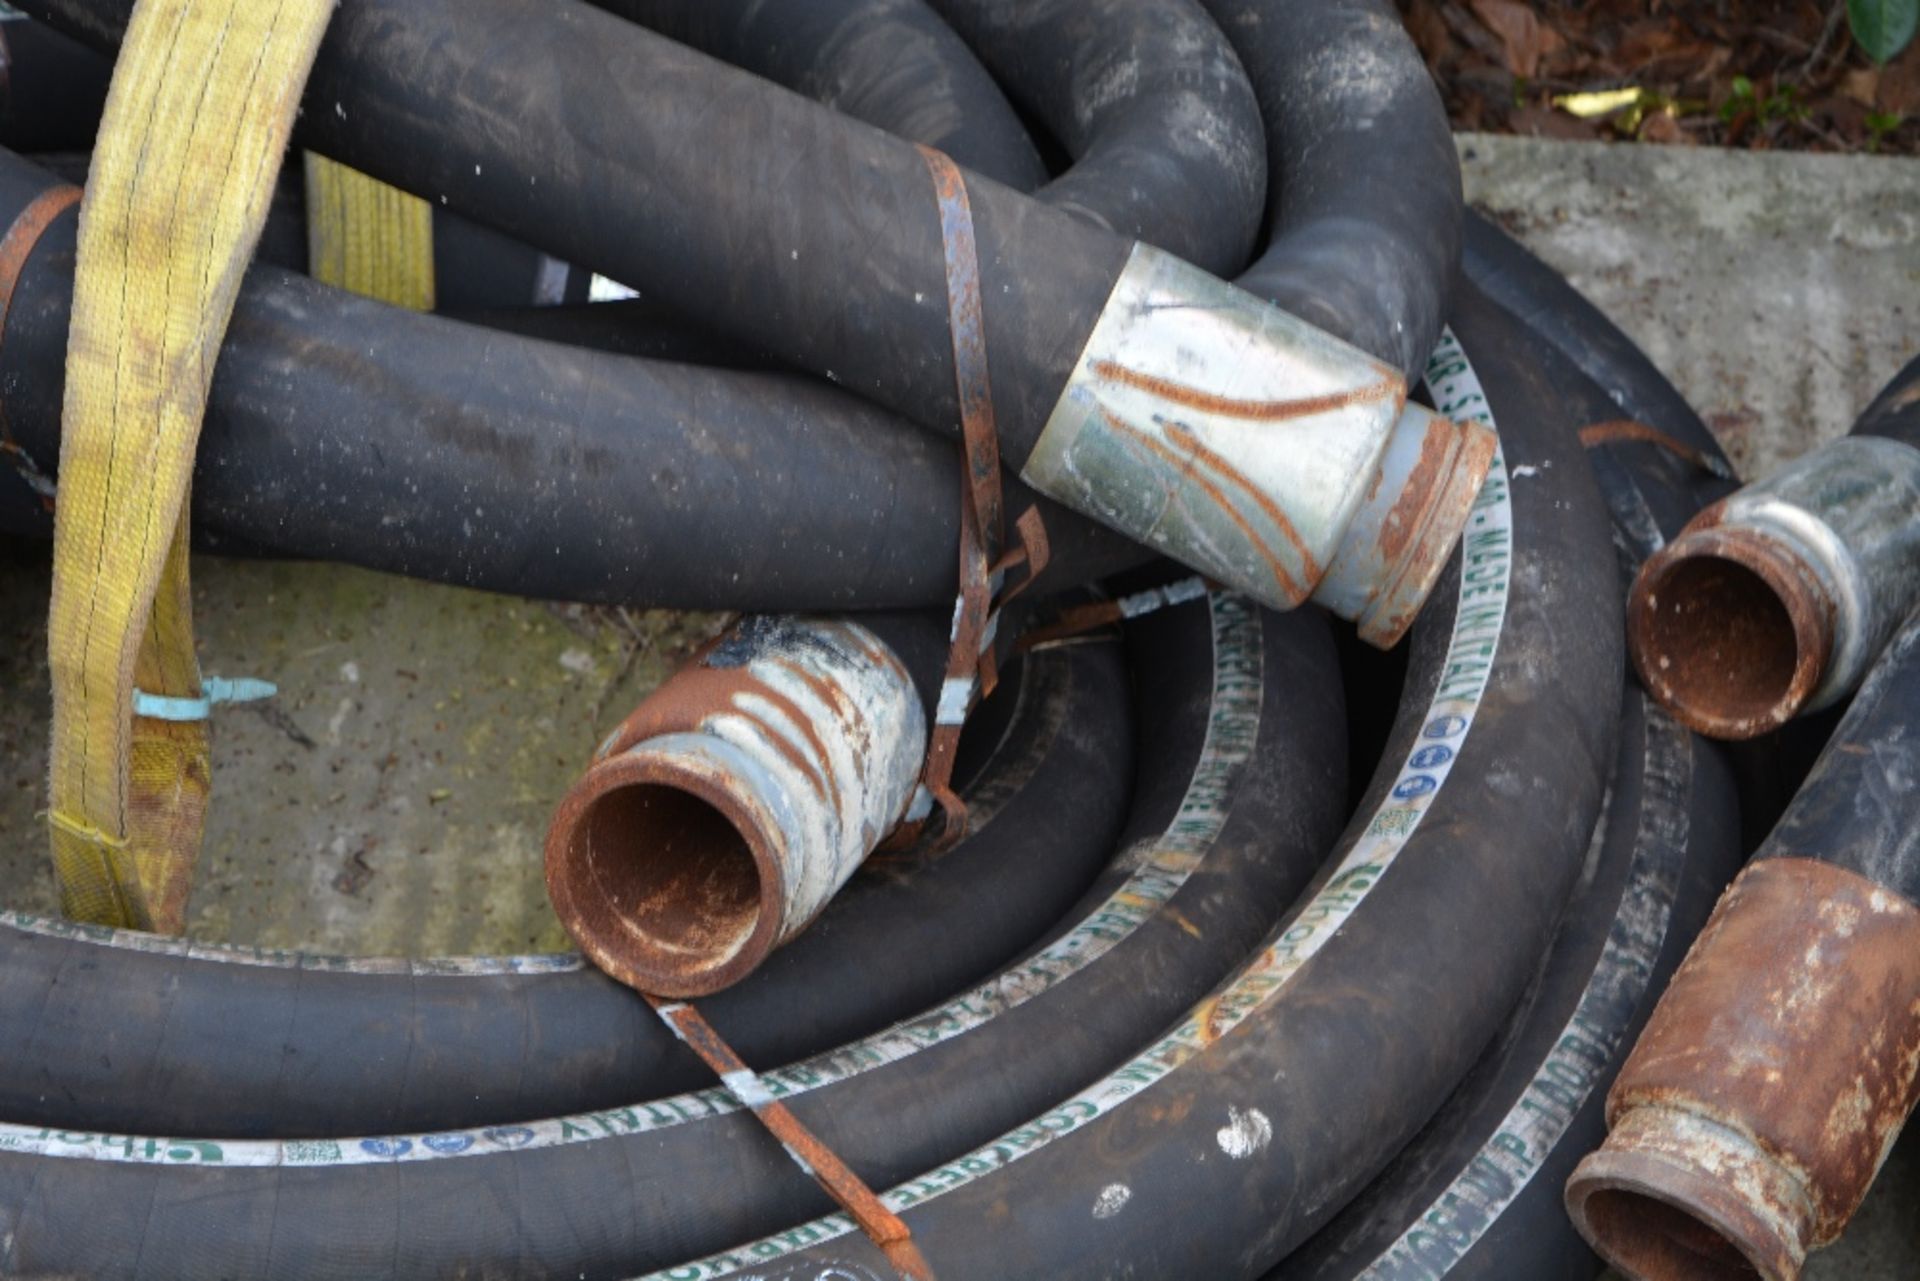 4'' CONCRETE PIPE (3 OF), 5M LENGTHS, ID: PL-15652, RUISLIP PLANT HIRE LTD. *UNRESERVED* - Image 2 of 3